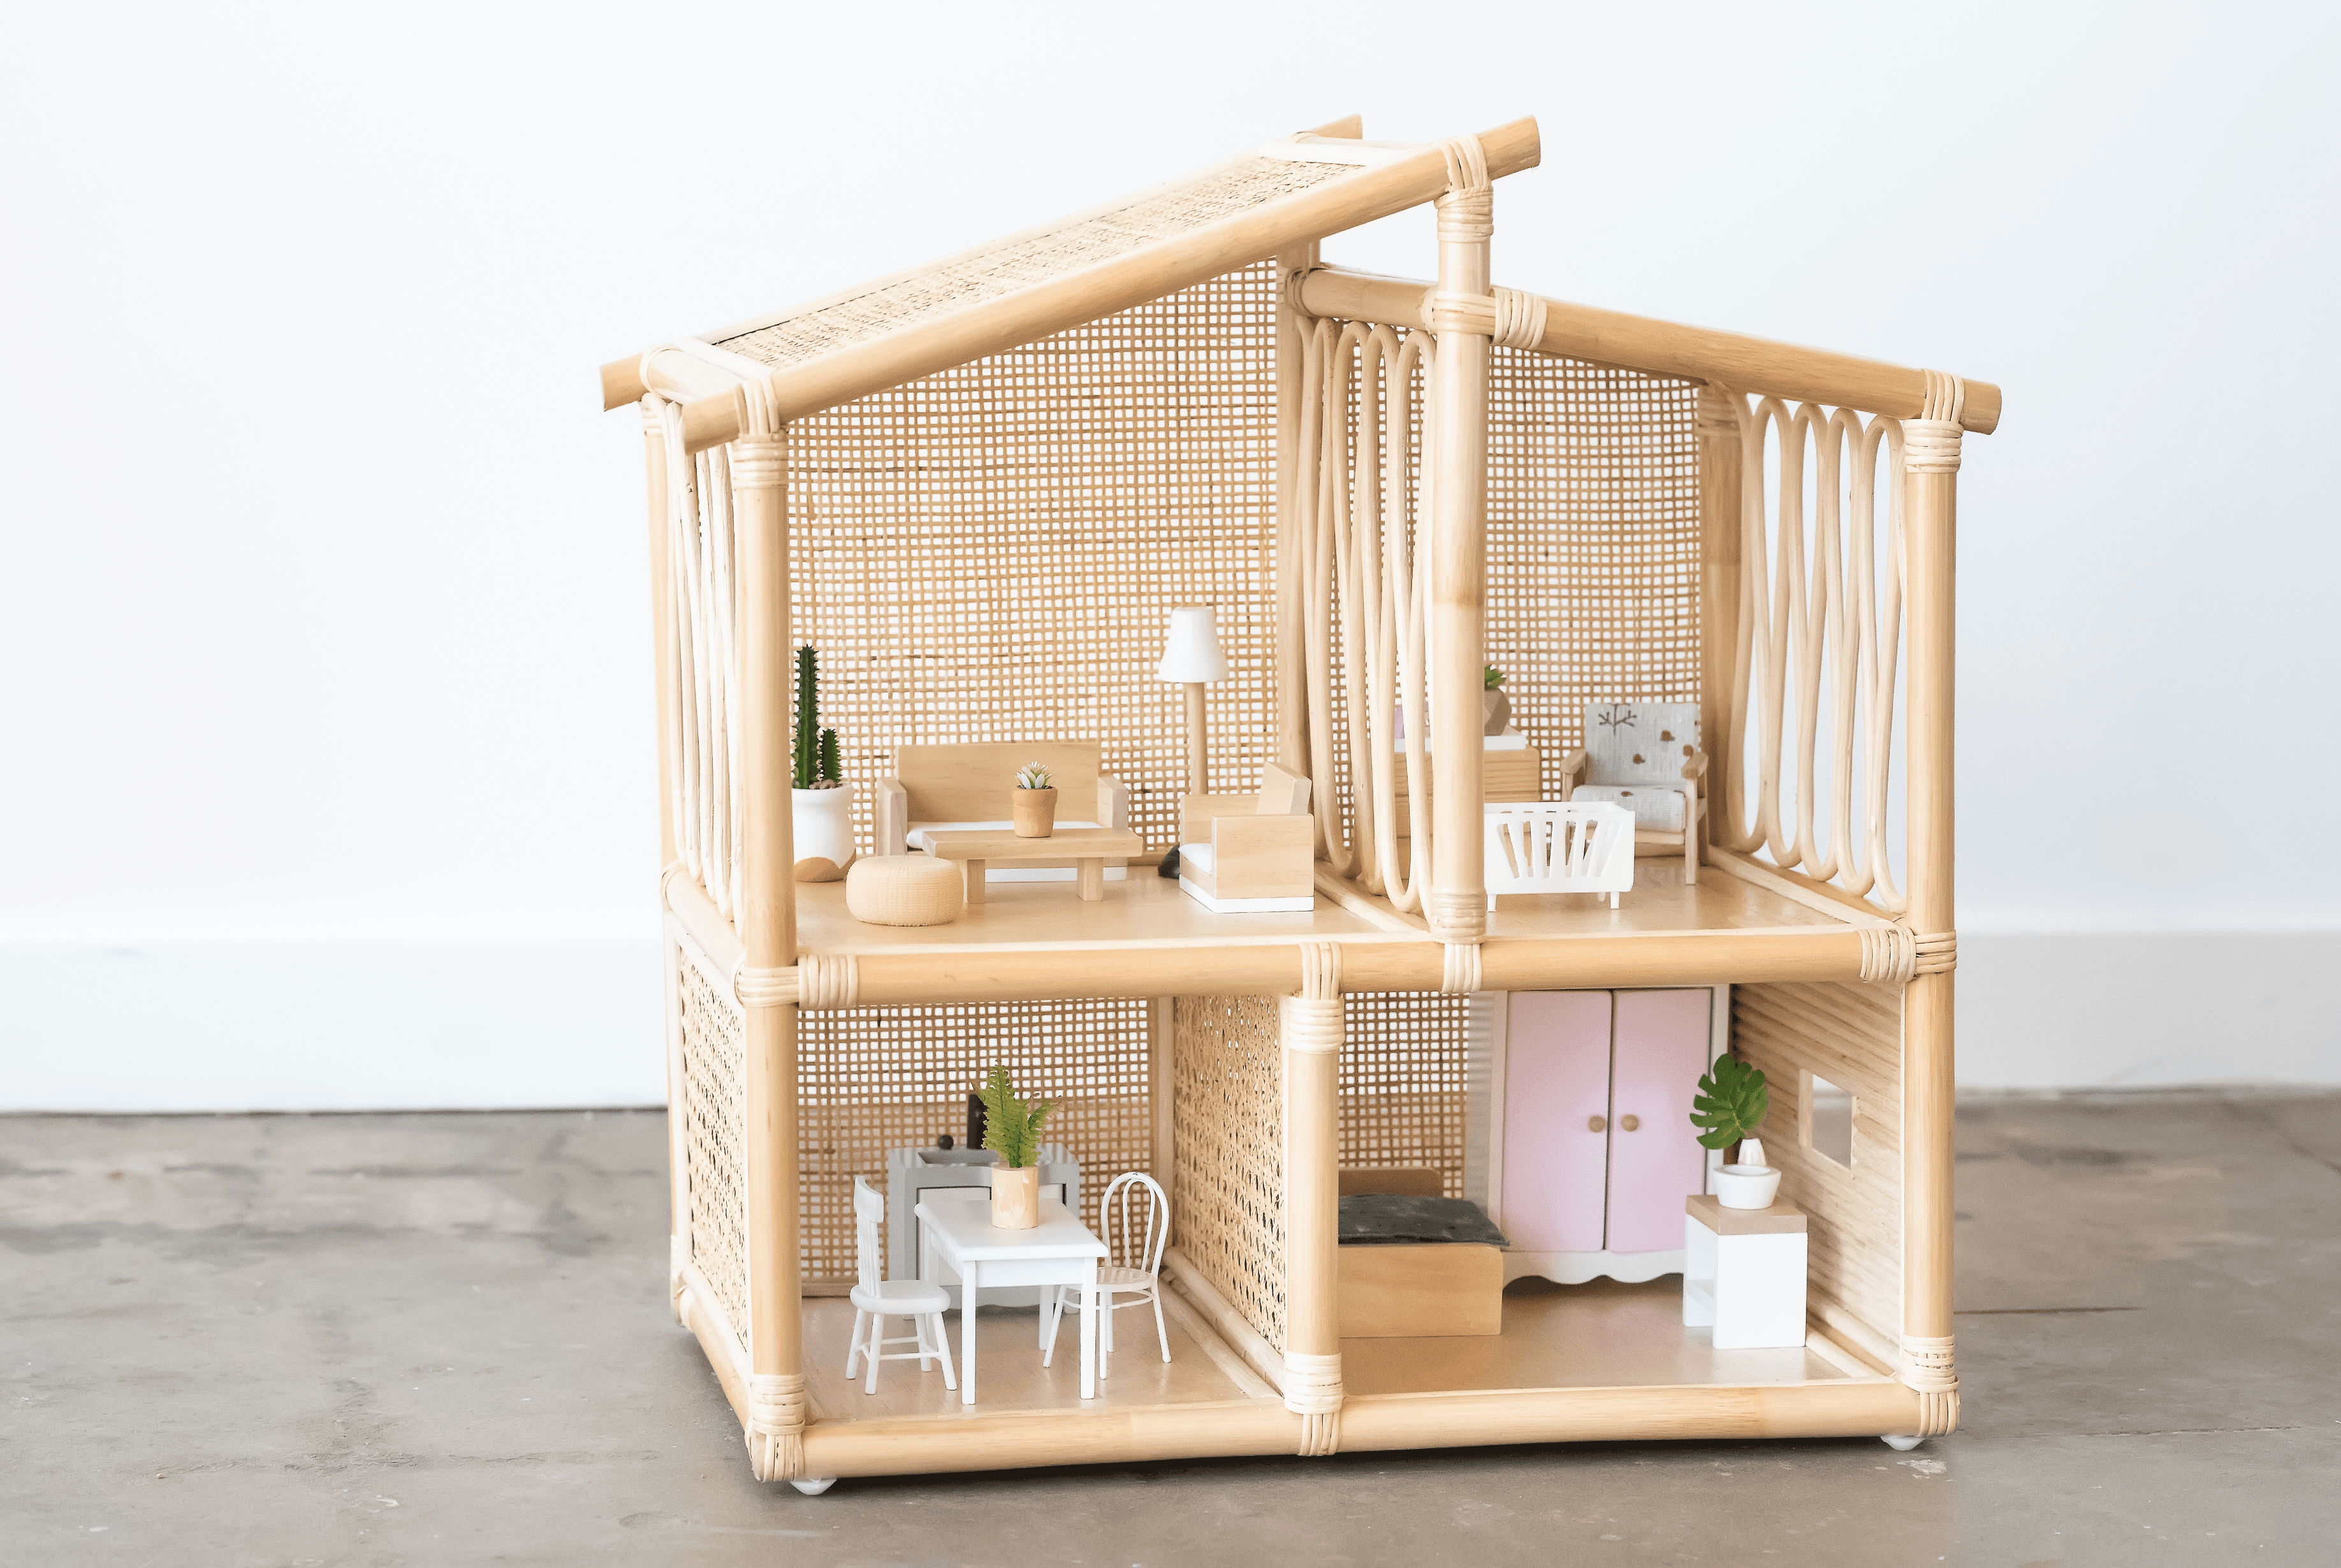 Edie Rattan Dollhouse - Why and Whale